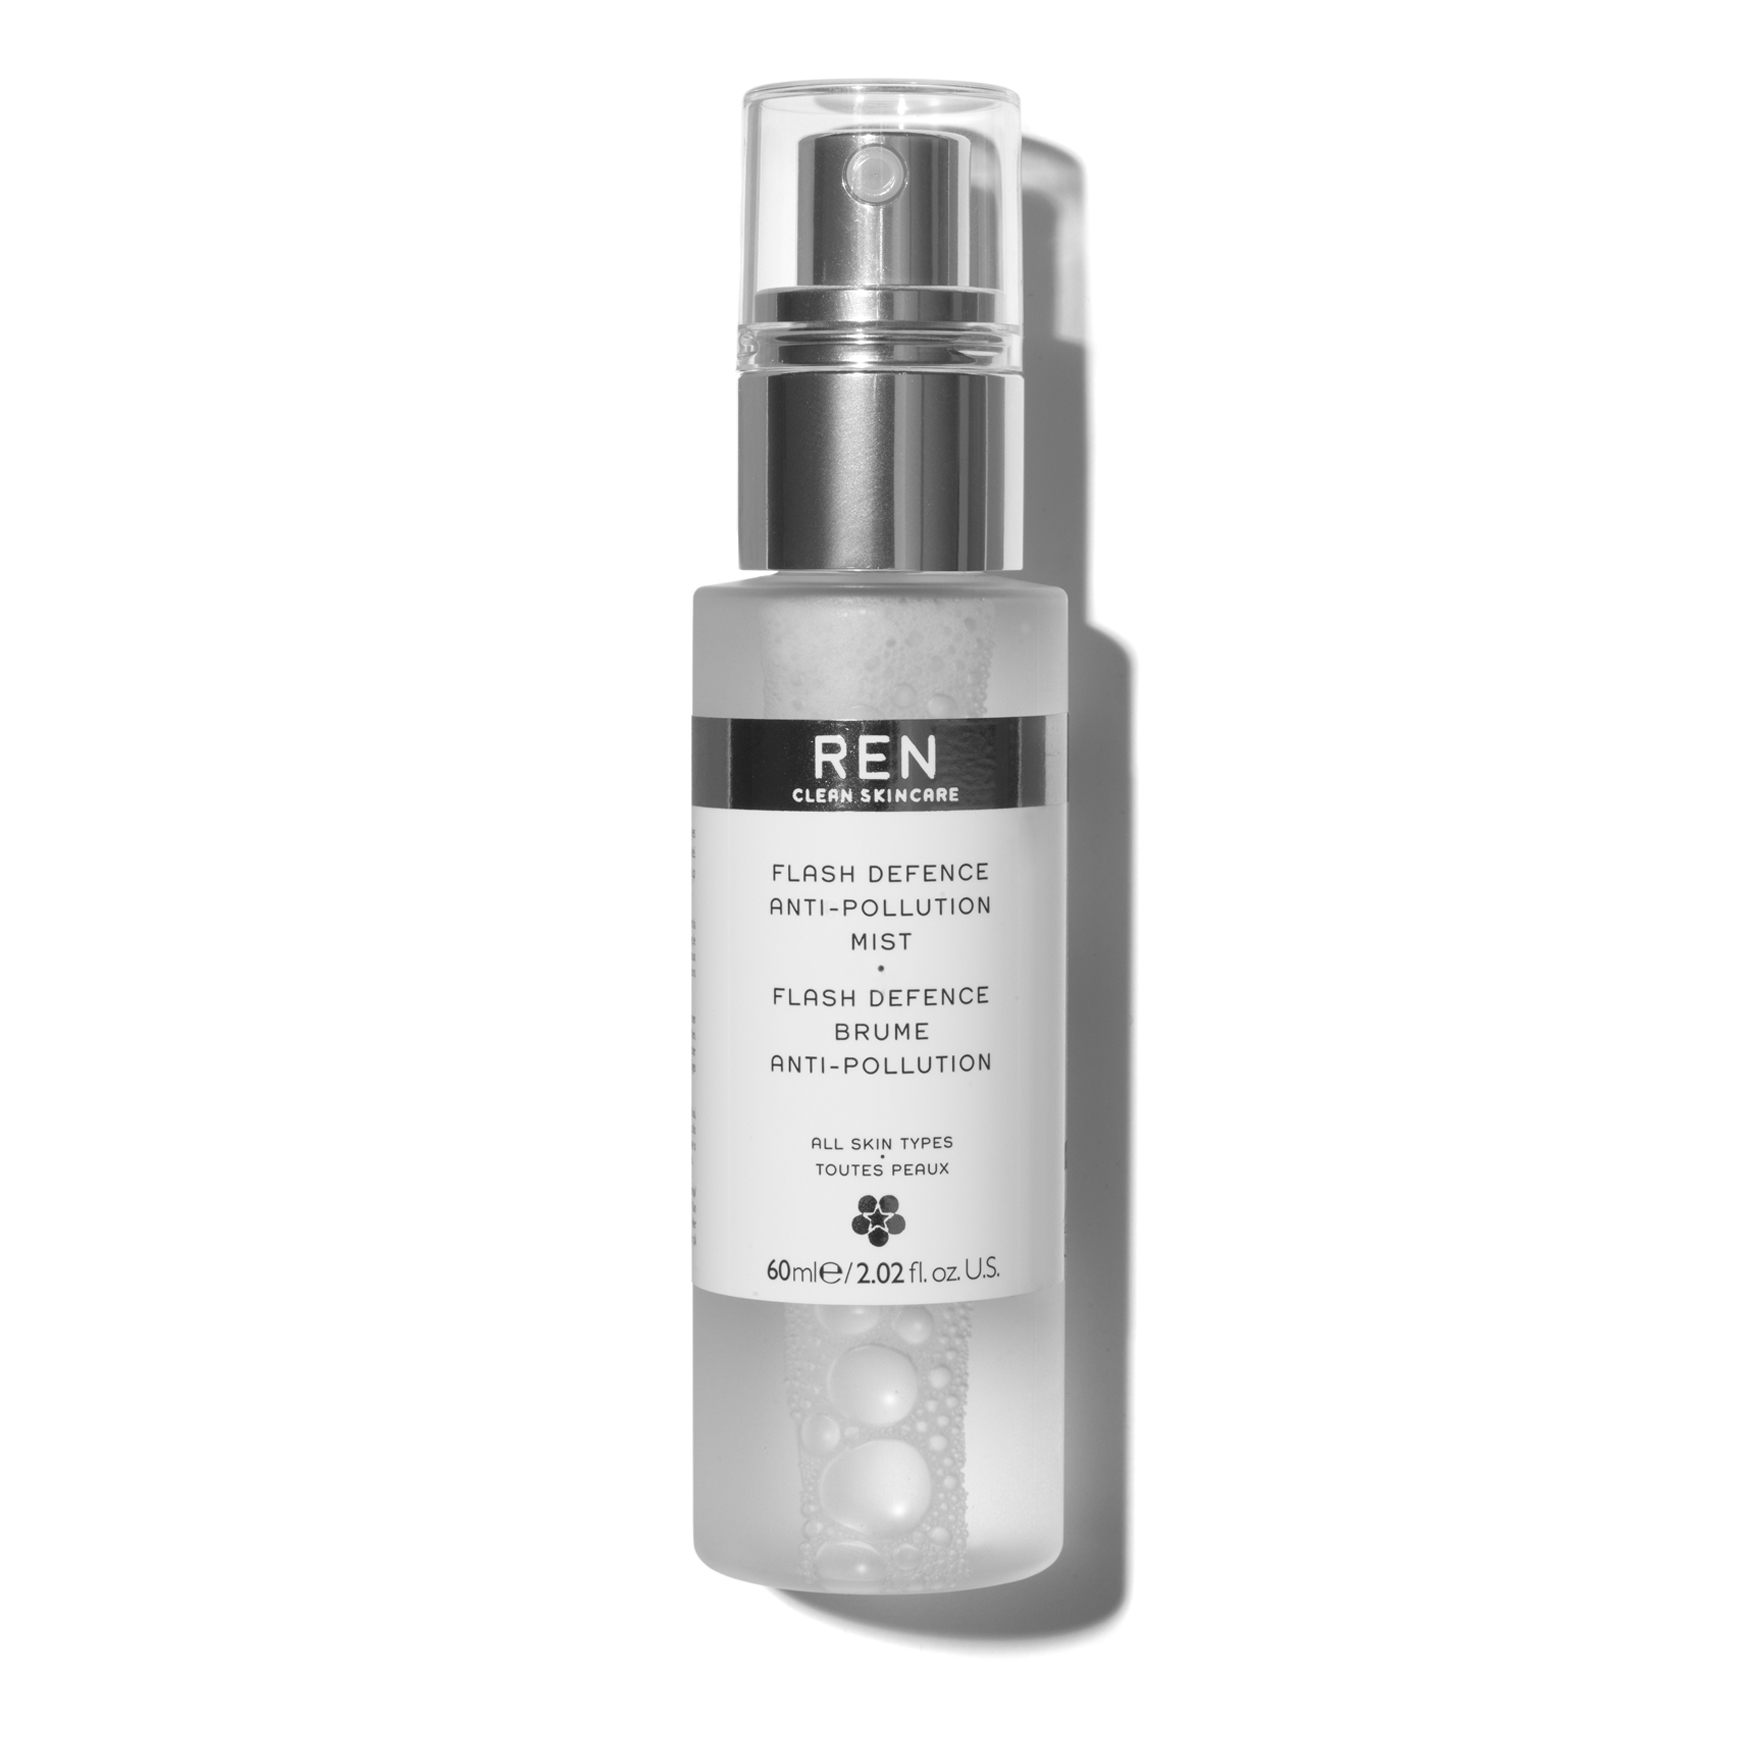 Ren Clean Skincare Flash Defence Anti-Pollution Mist | Space NK